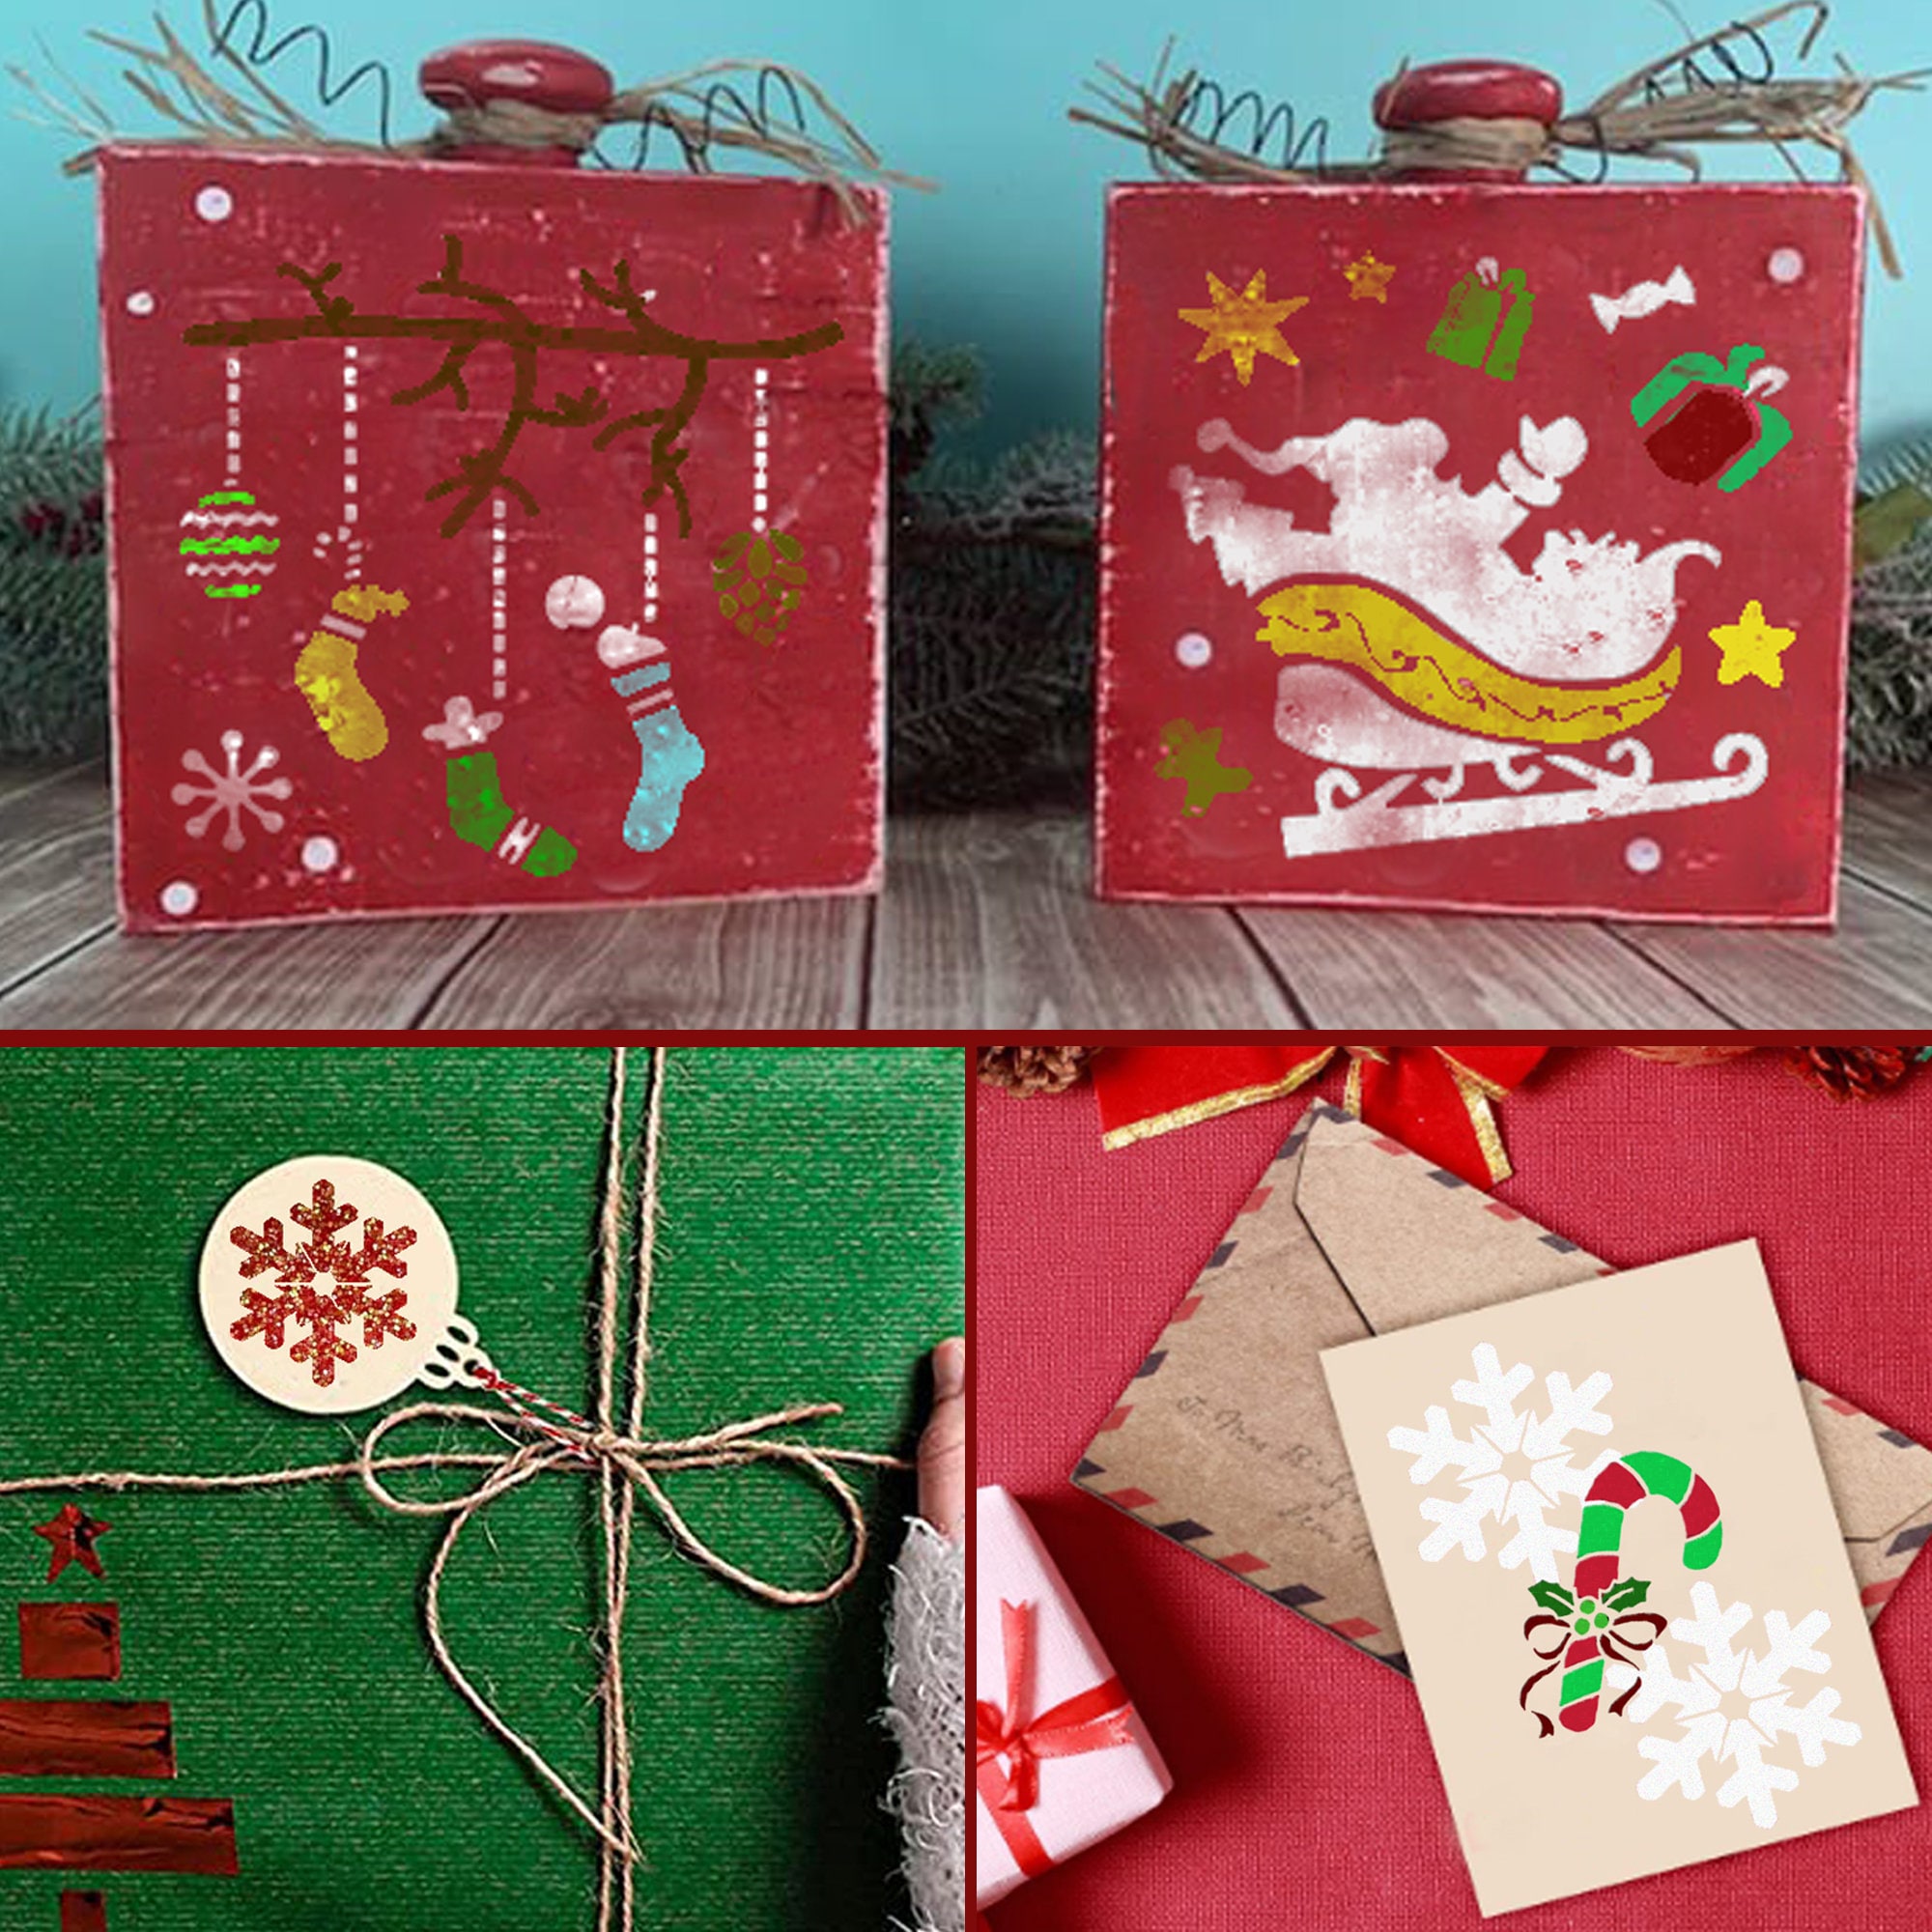 Any 2 GRINCH Stencils Reusable Merry Christmas Stencils for 